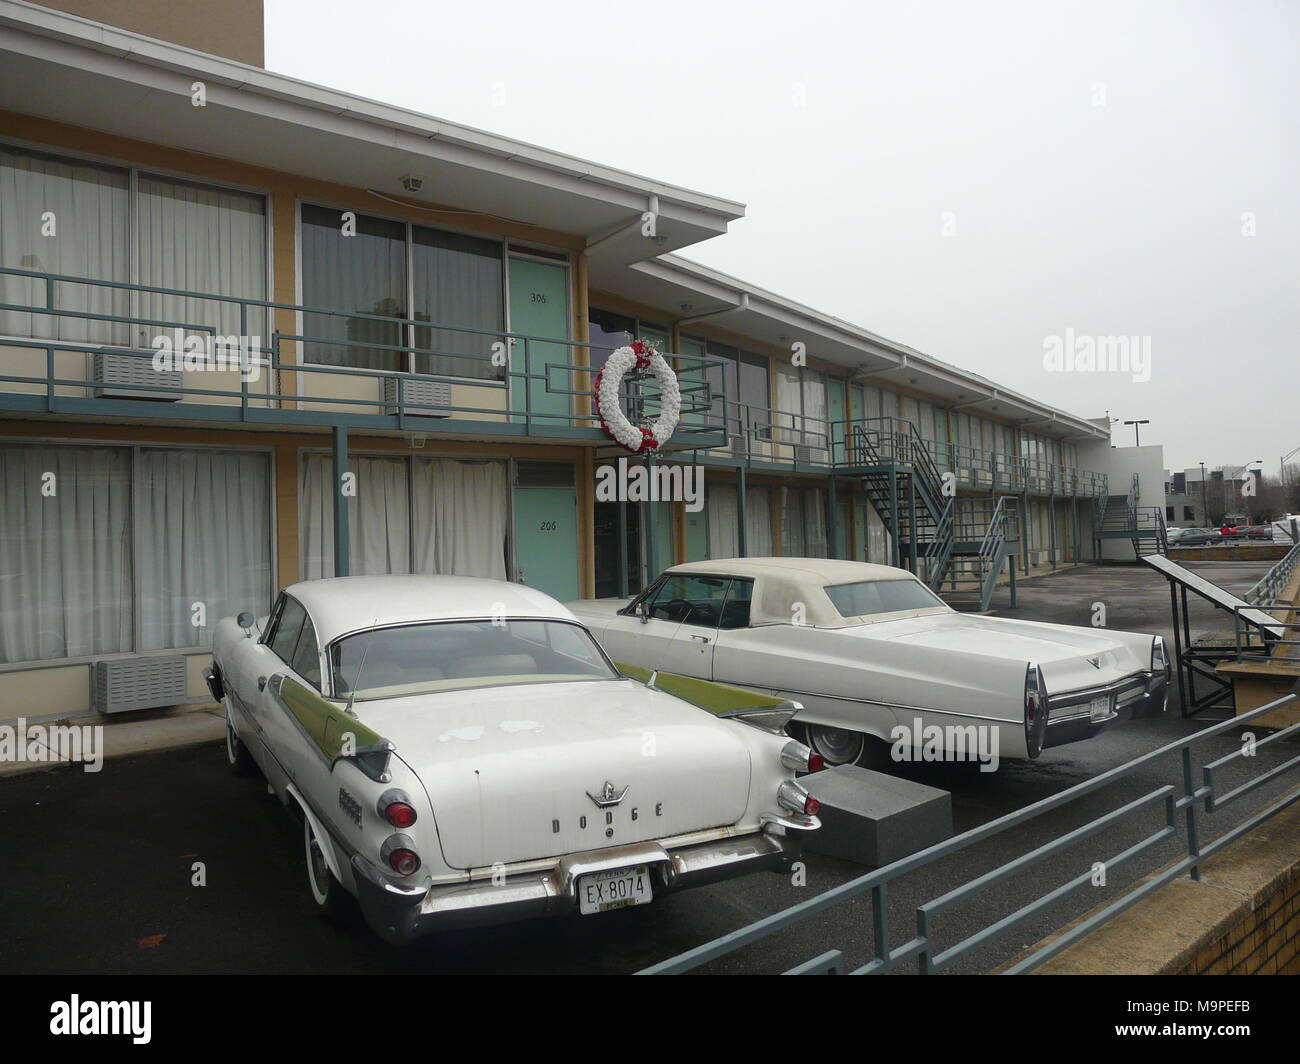 24 Febuary 2018, USA, Memphis: The Lorraine Motel. The civil rights activist Martin Luther King Jr. was hit by shots on the balcony of room 306 on 04 April 1968. Today, the former hotel is a civil rights museum. A wreath marks the place of the assassination. Photo: Michael Donhauser/dpa Stock Photo